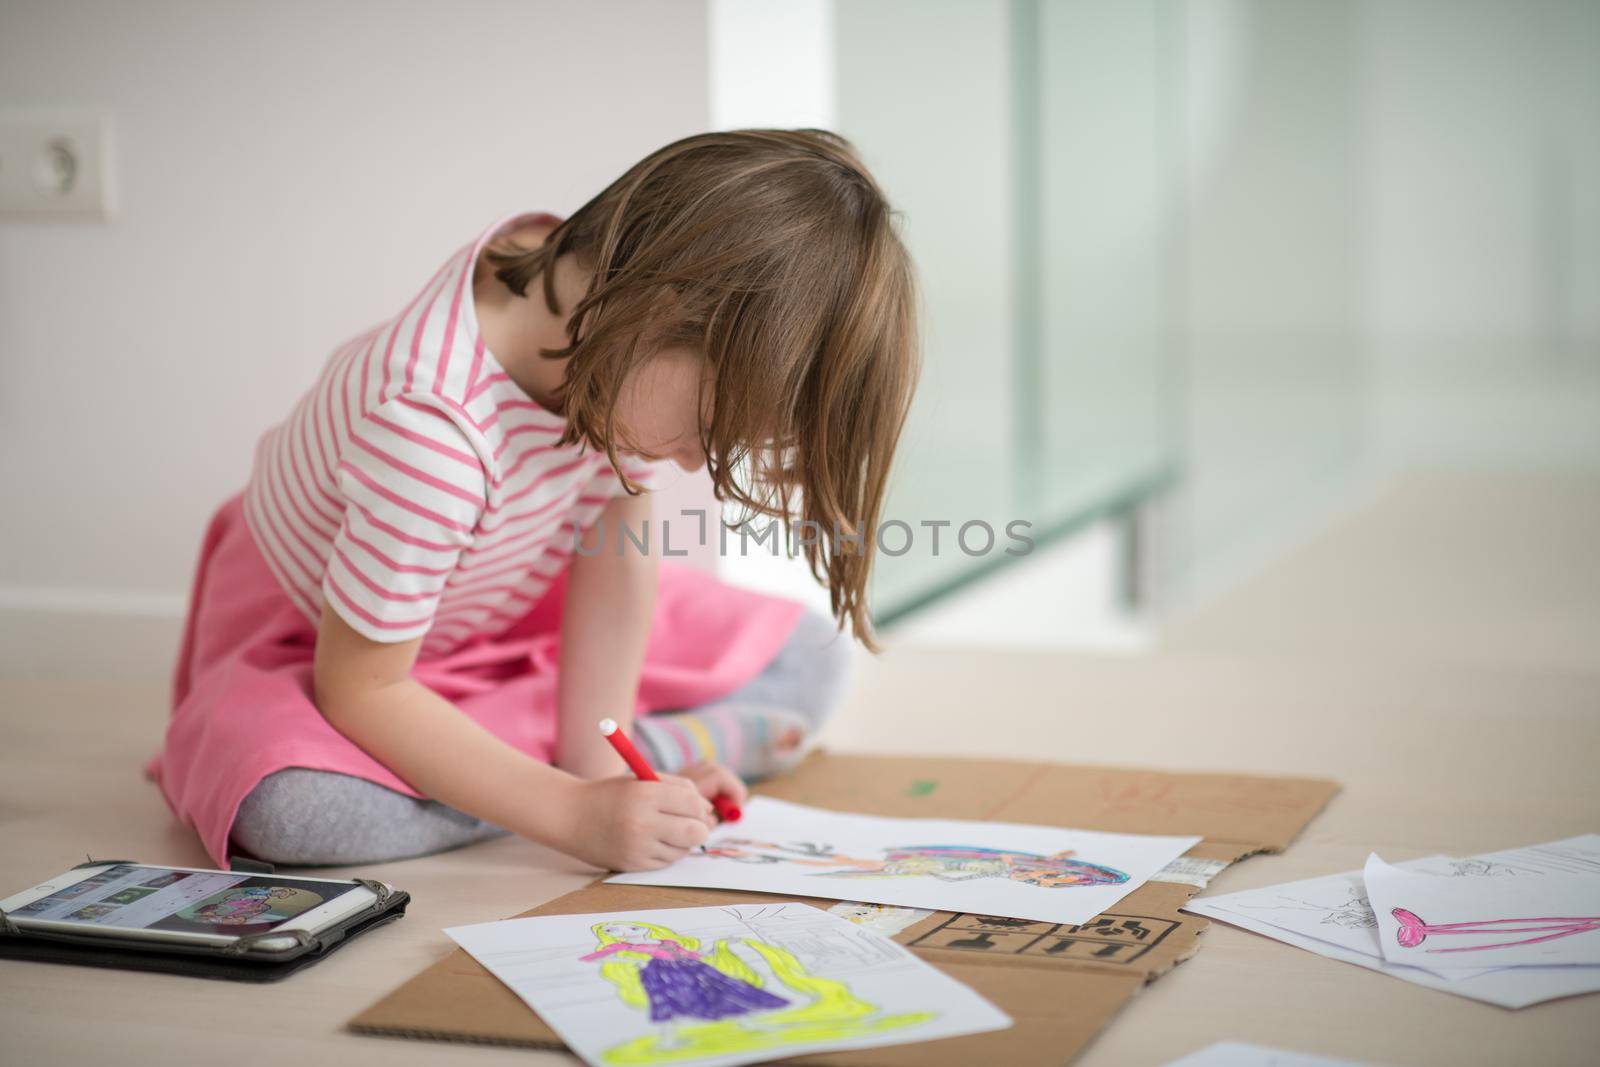 child playign at home while drawing colorful art and looking digital tablet